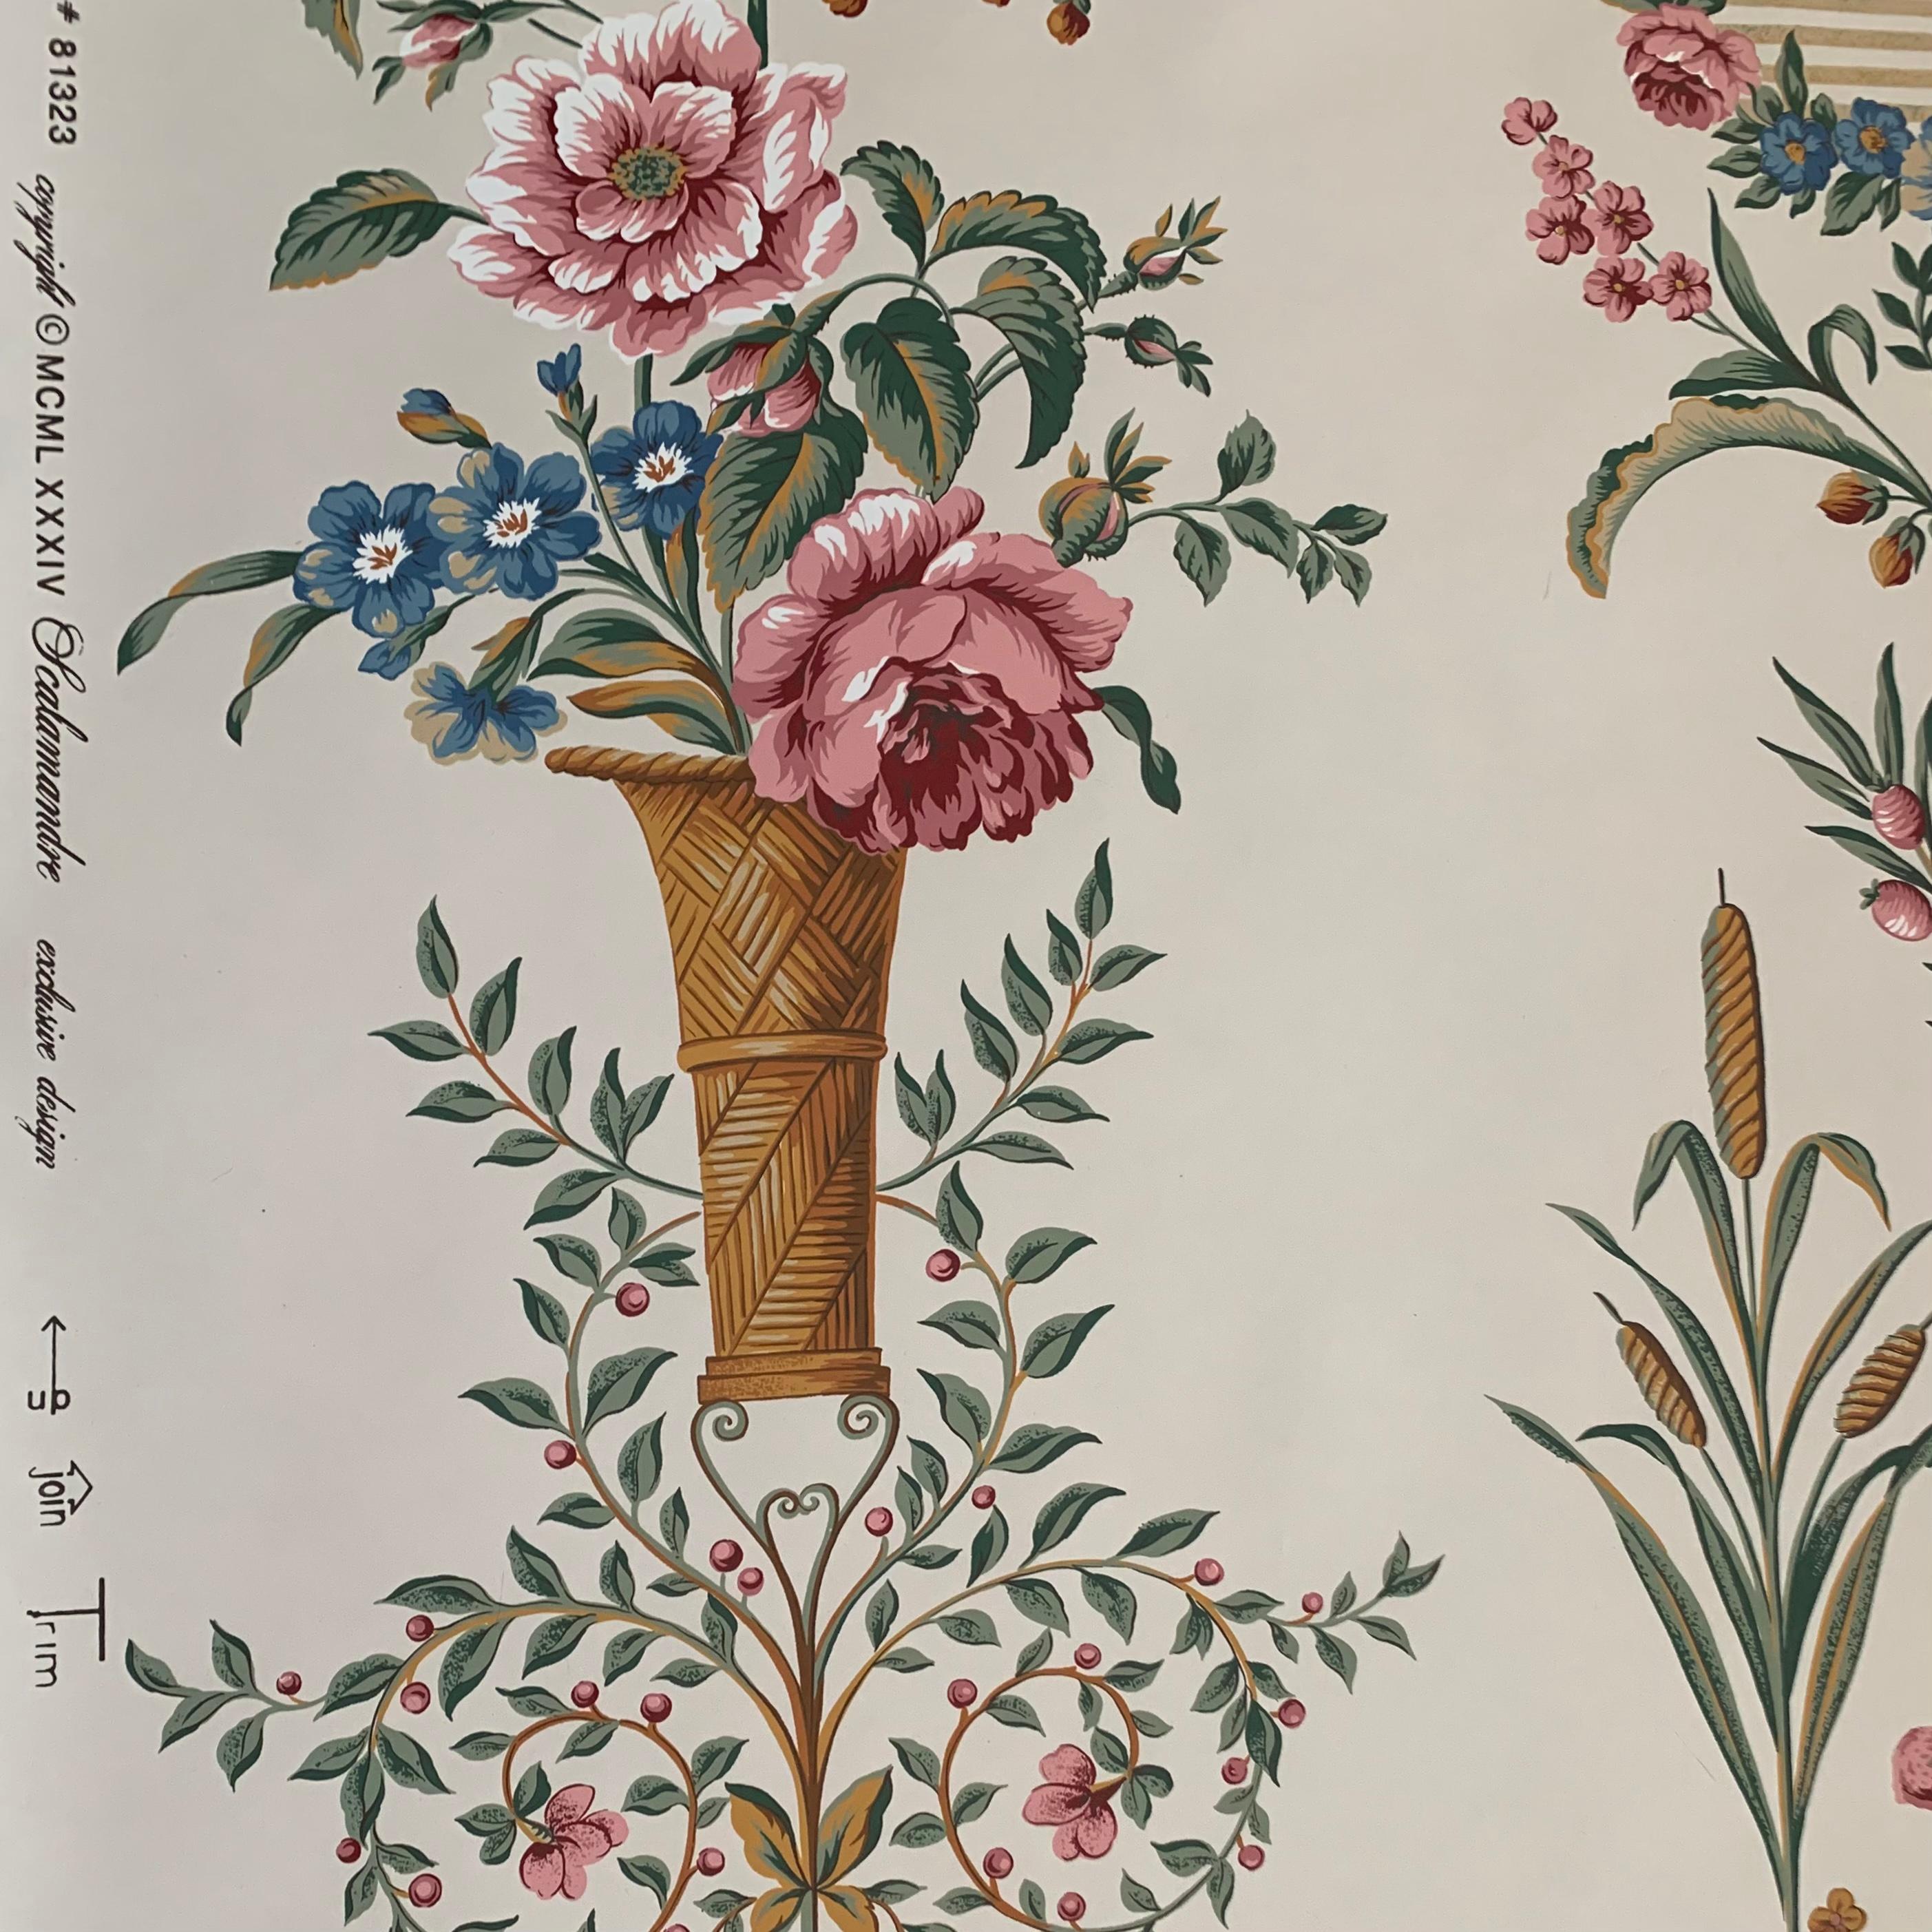 Scalamandre hand-printed Irish Historical Society Dublin panel floral wallpaper 1984. Rare vintage print. One double roll available. 
 ‘’Irish Georgian Society Collection’’
Approximately 33+ linear feet / 11 yards / double roll
Pattern number